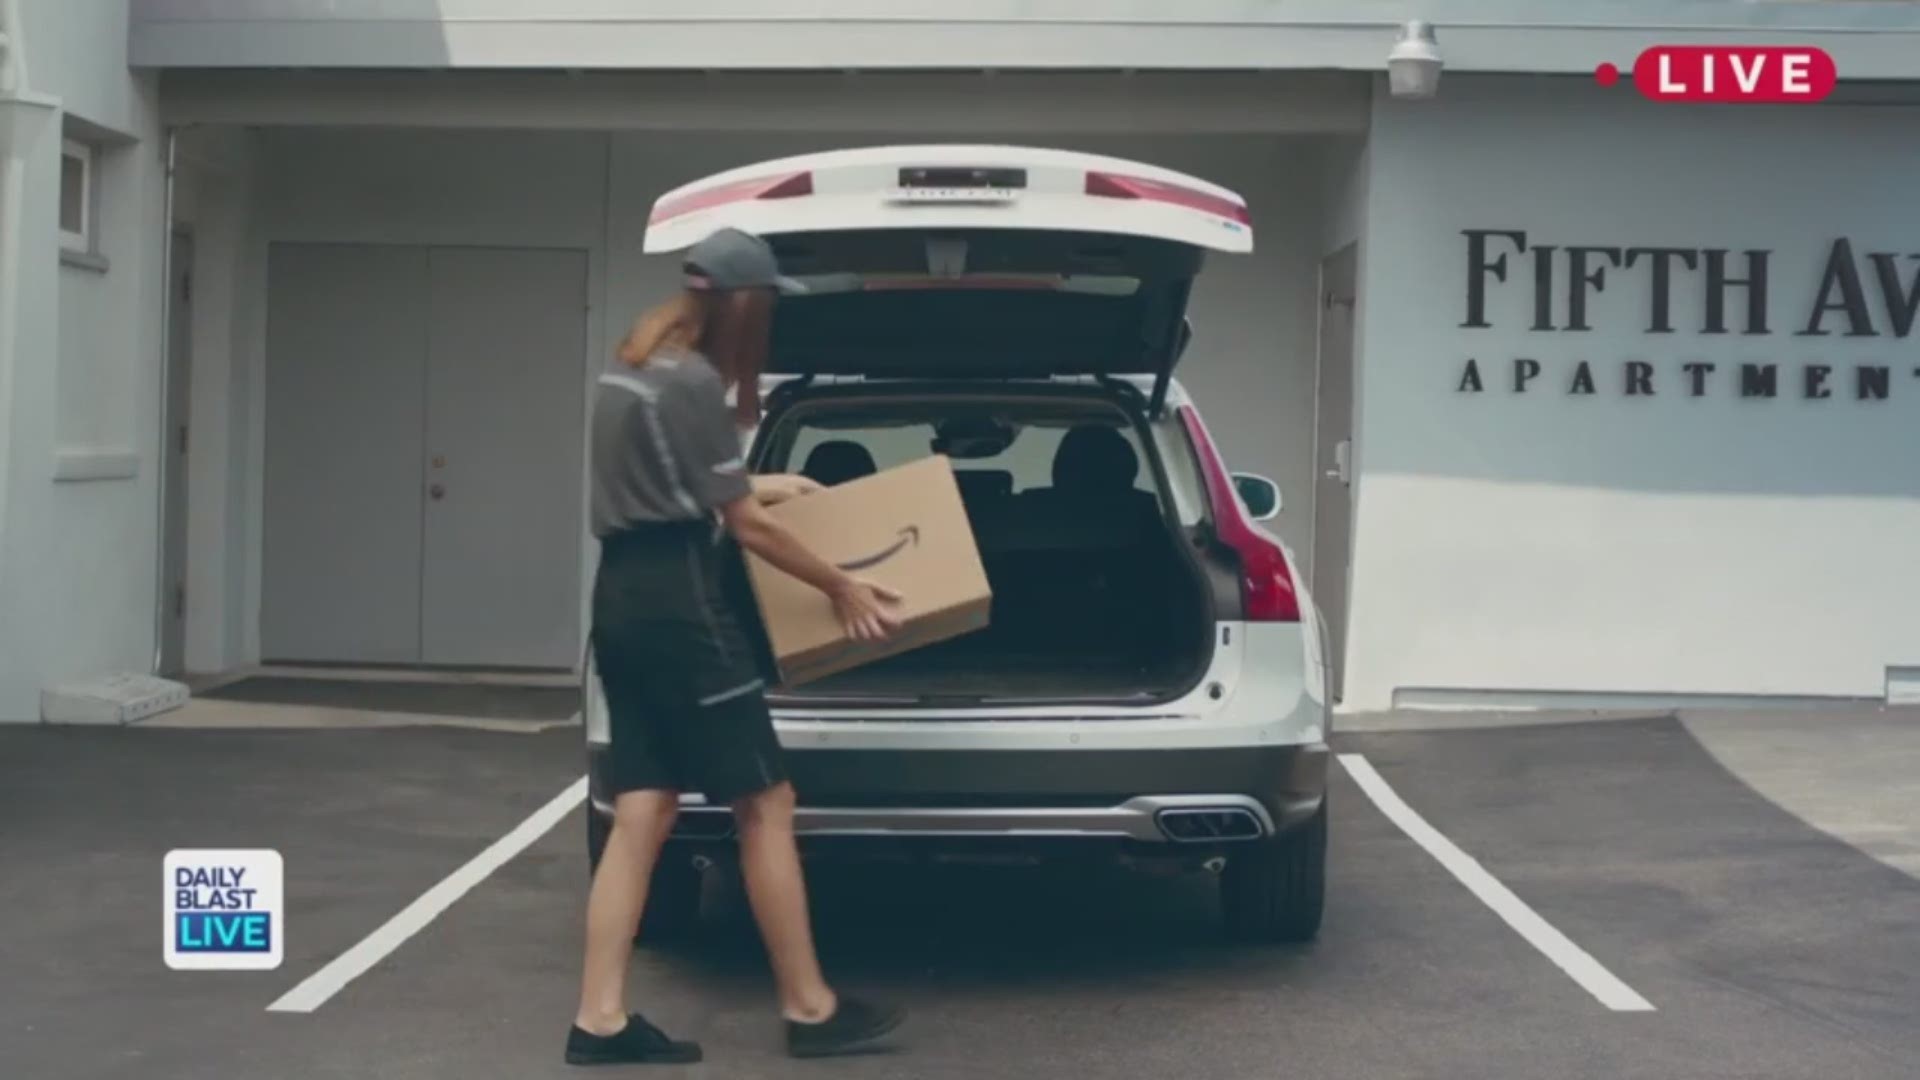 Amazon will now deliver junk to your trunk? The company is launching a new service that gives its couriers access to a person's vehicle for the purpose of leaving package deliveries inside. Daily Blast LIVE panel discusses, is this new feature convenient 